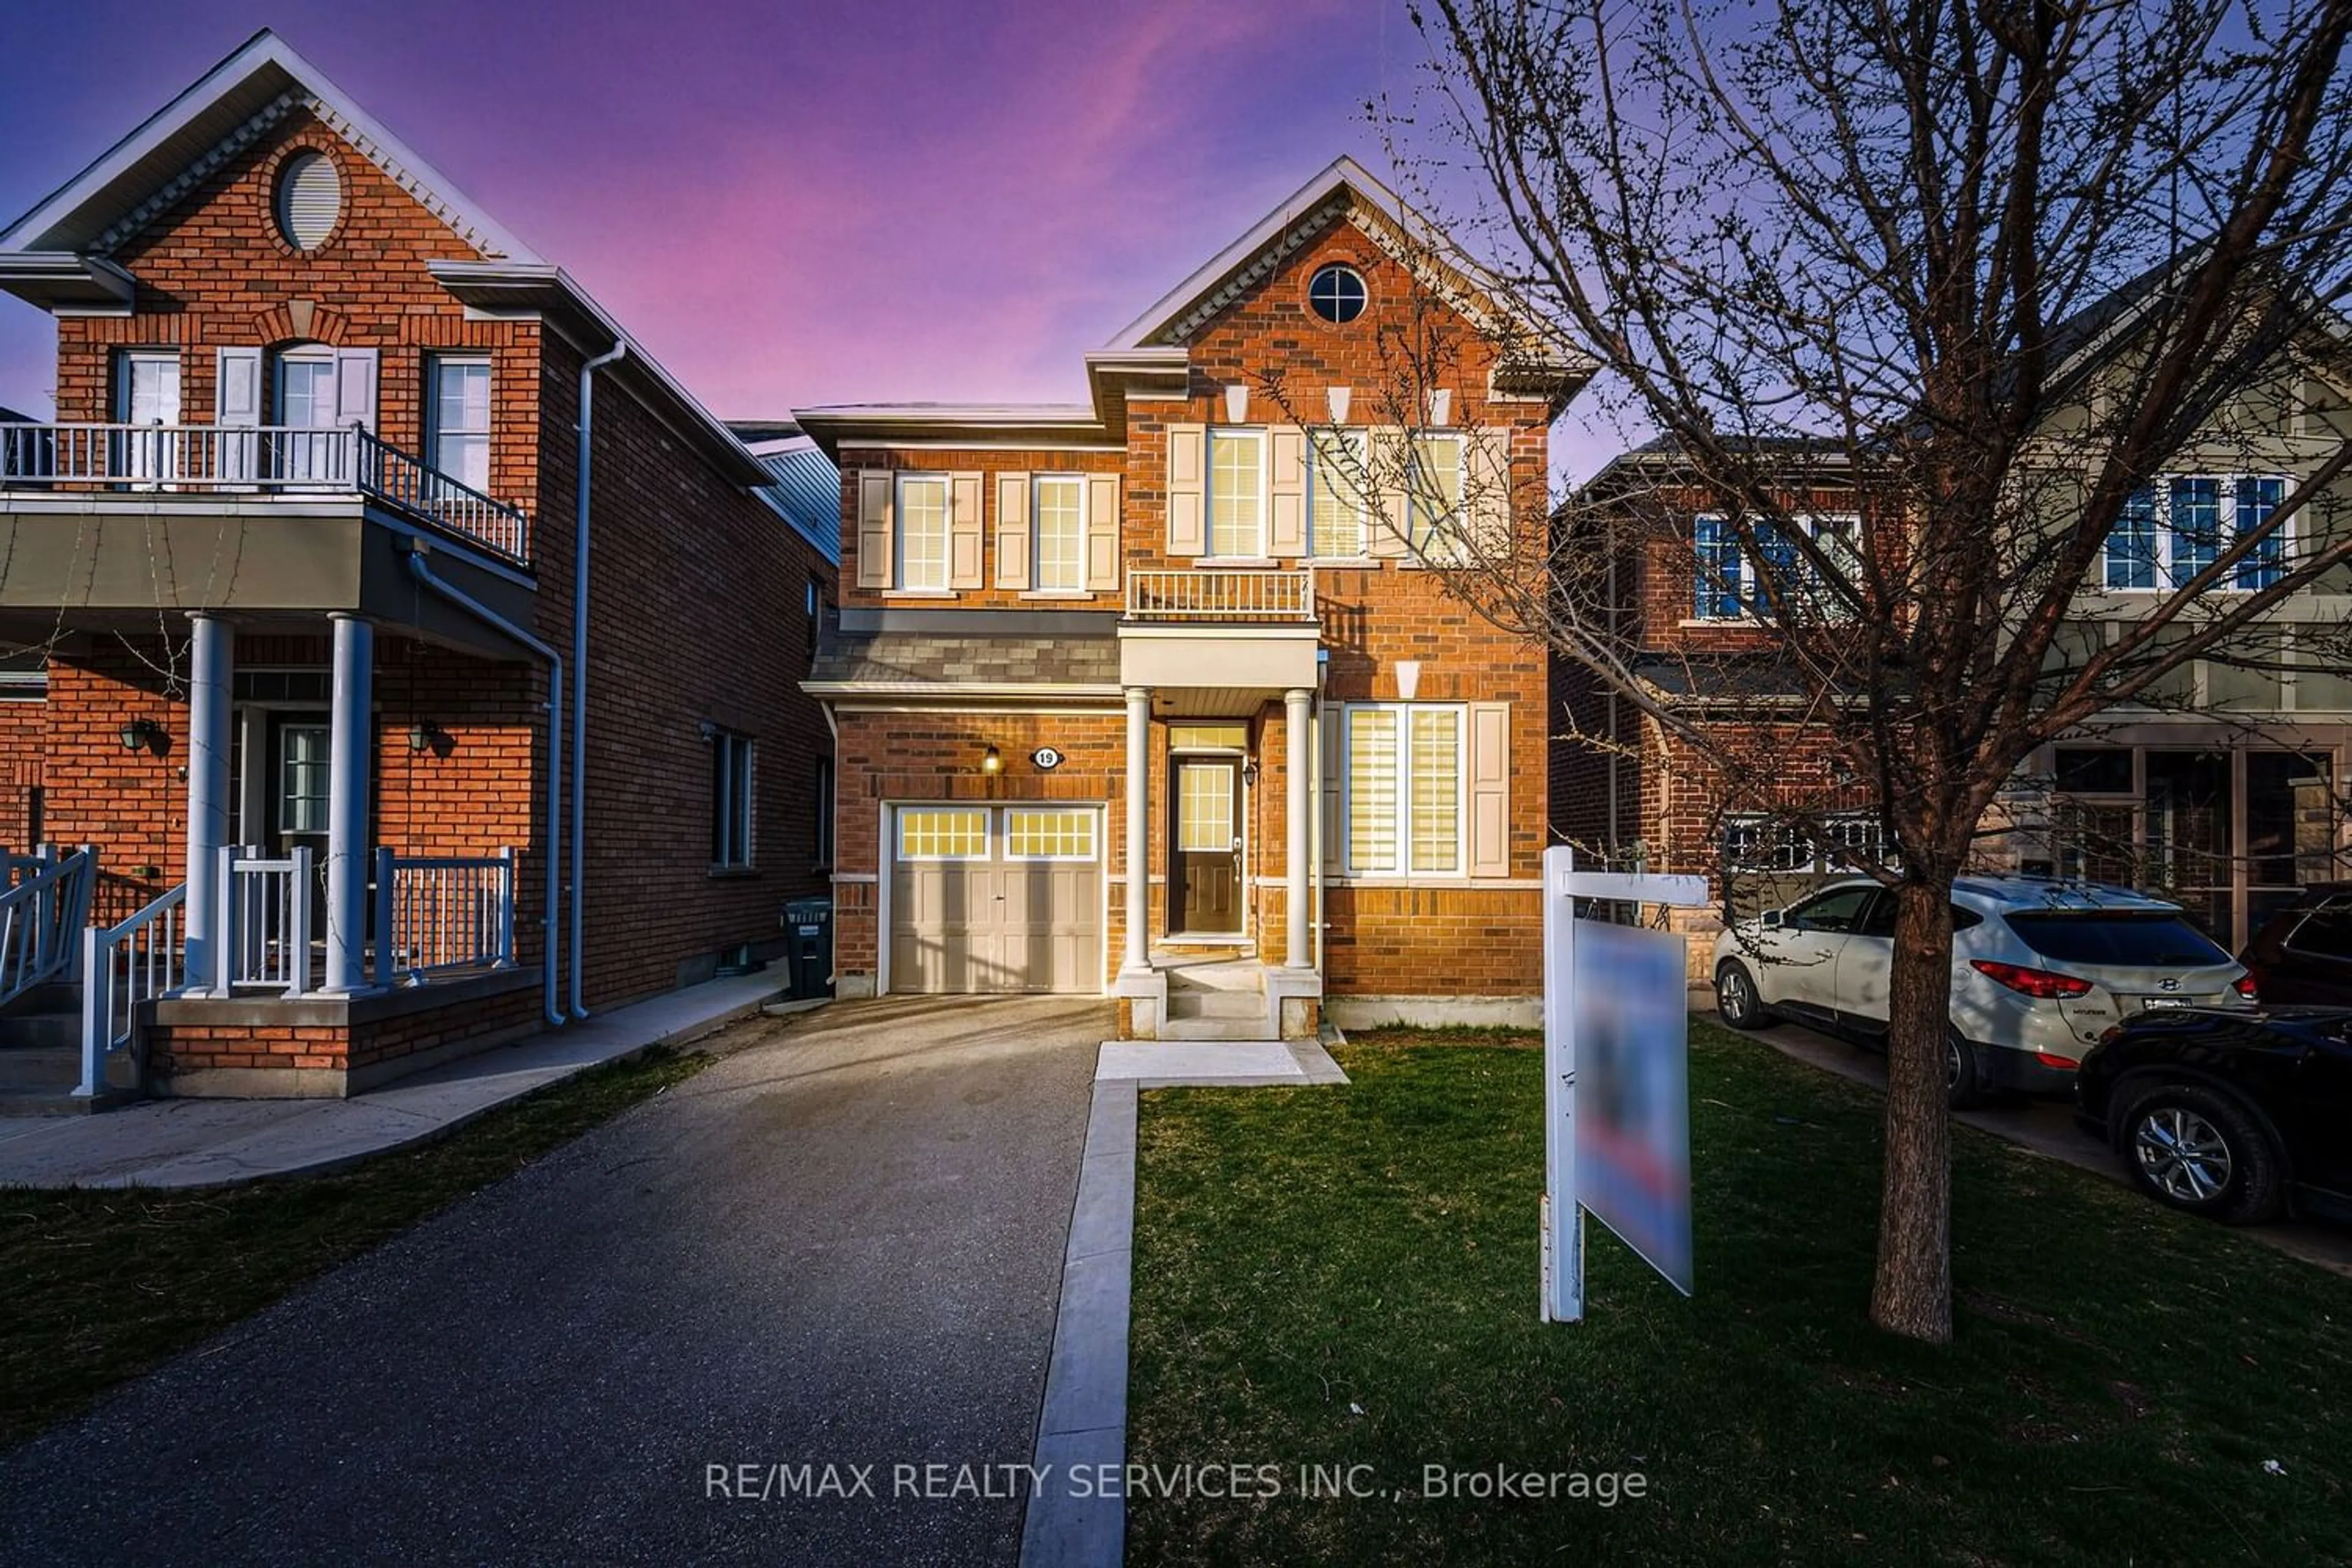 Home with brick exterior material for 19 Feeder St, Brampton Ontario L7A 4T7